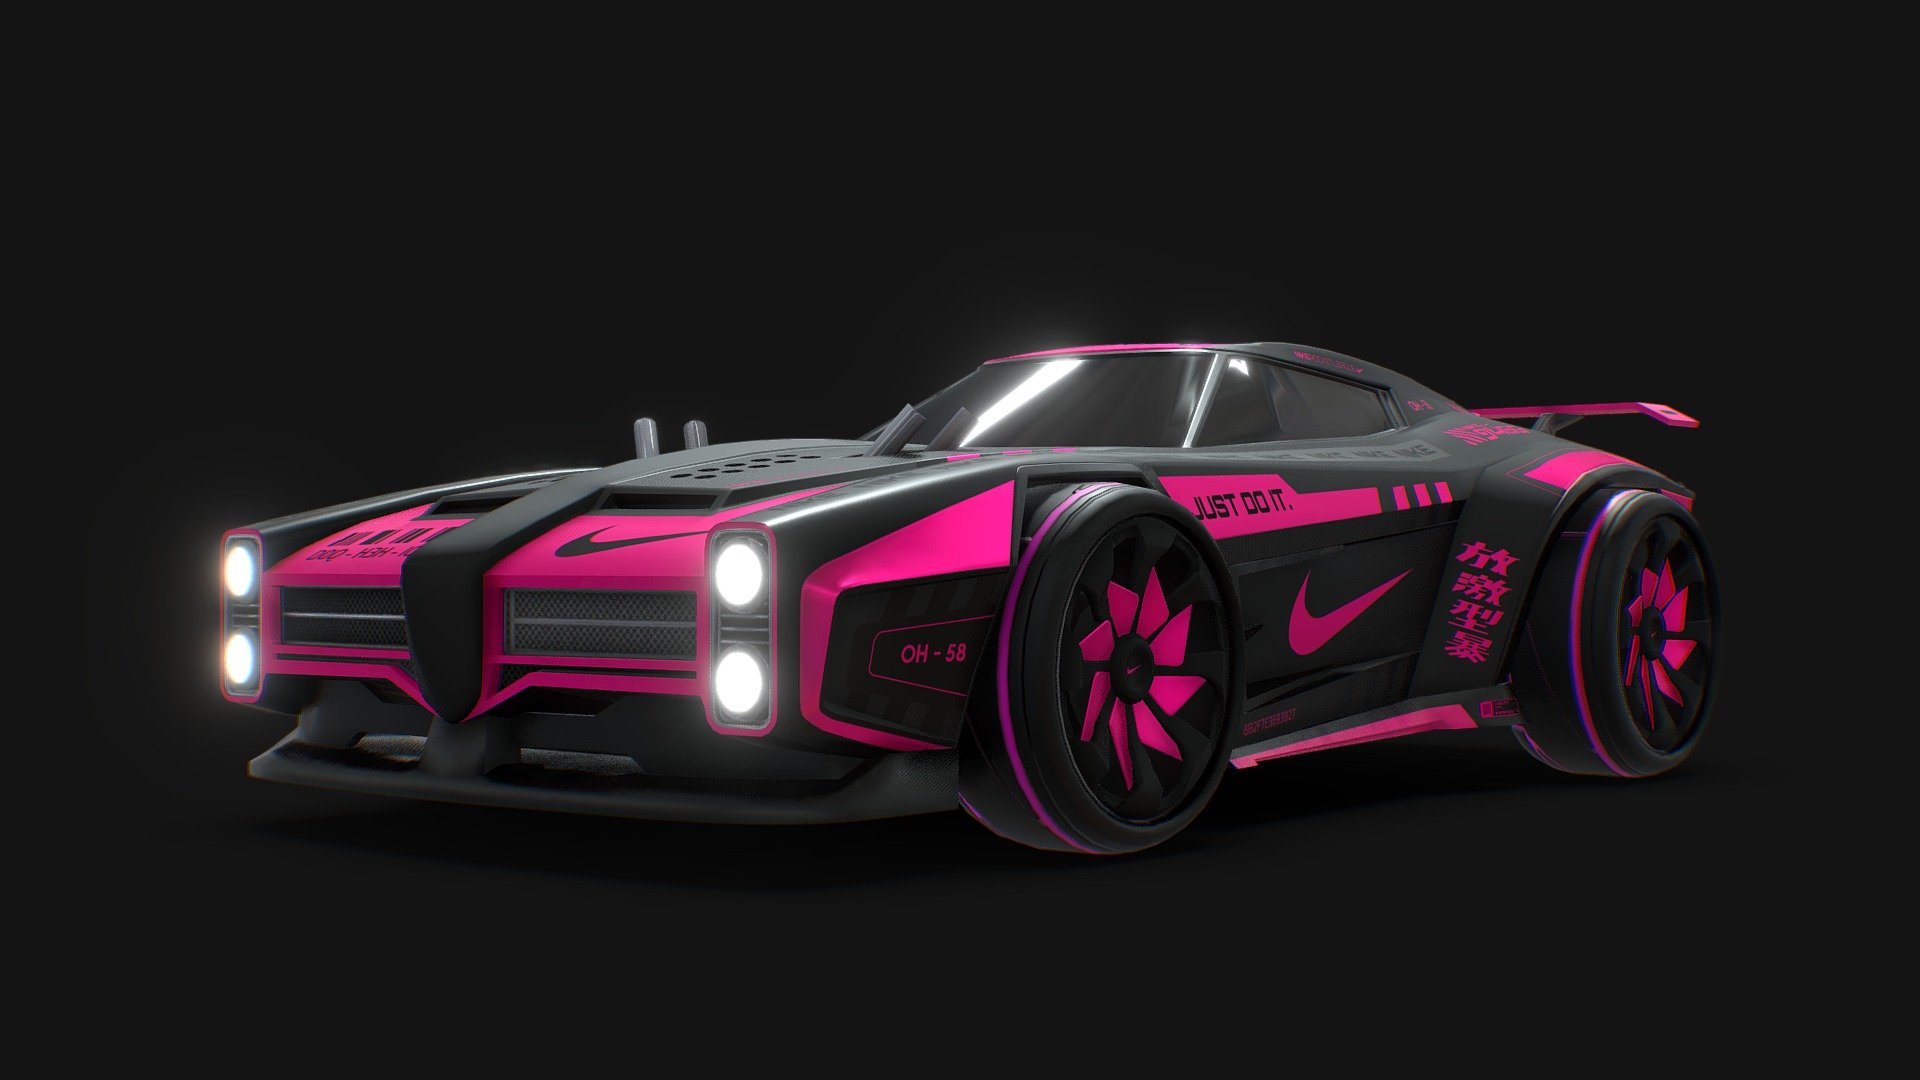 NIKE VOLTA

Discover the VOLTA skin for the Dominus model on Rocket League game. 

Find the other Nike Esport Shop skins on my profile.

Disclaimer : Nike Esport Shop is a fictional project that consists of imagining the future skins made by the equipment manufacturer NIKE in various major esports games.

Socials networks : 



Twitter : https://twitter.com/peiksprod



Instagram : https://www.instagram.com/peiksprod



Youtube : https://www.youtube.com/c/PeiksProd



Behance : https://www.behance.net/peiksprod


 - NIKE VOLTA - Dominus (Rocket League) - 3D model by PEIKS 3d model